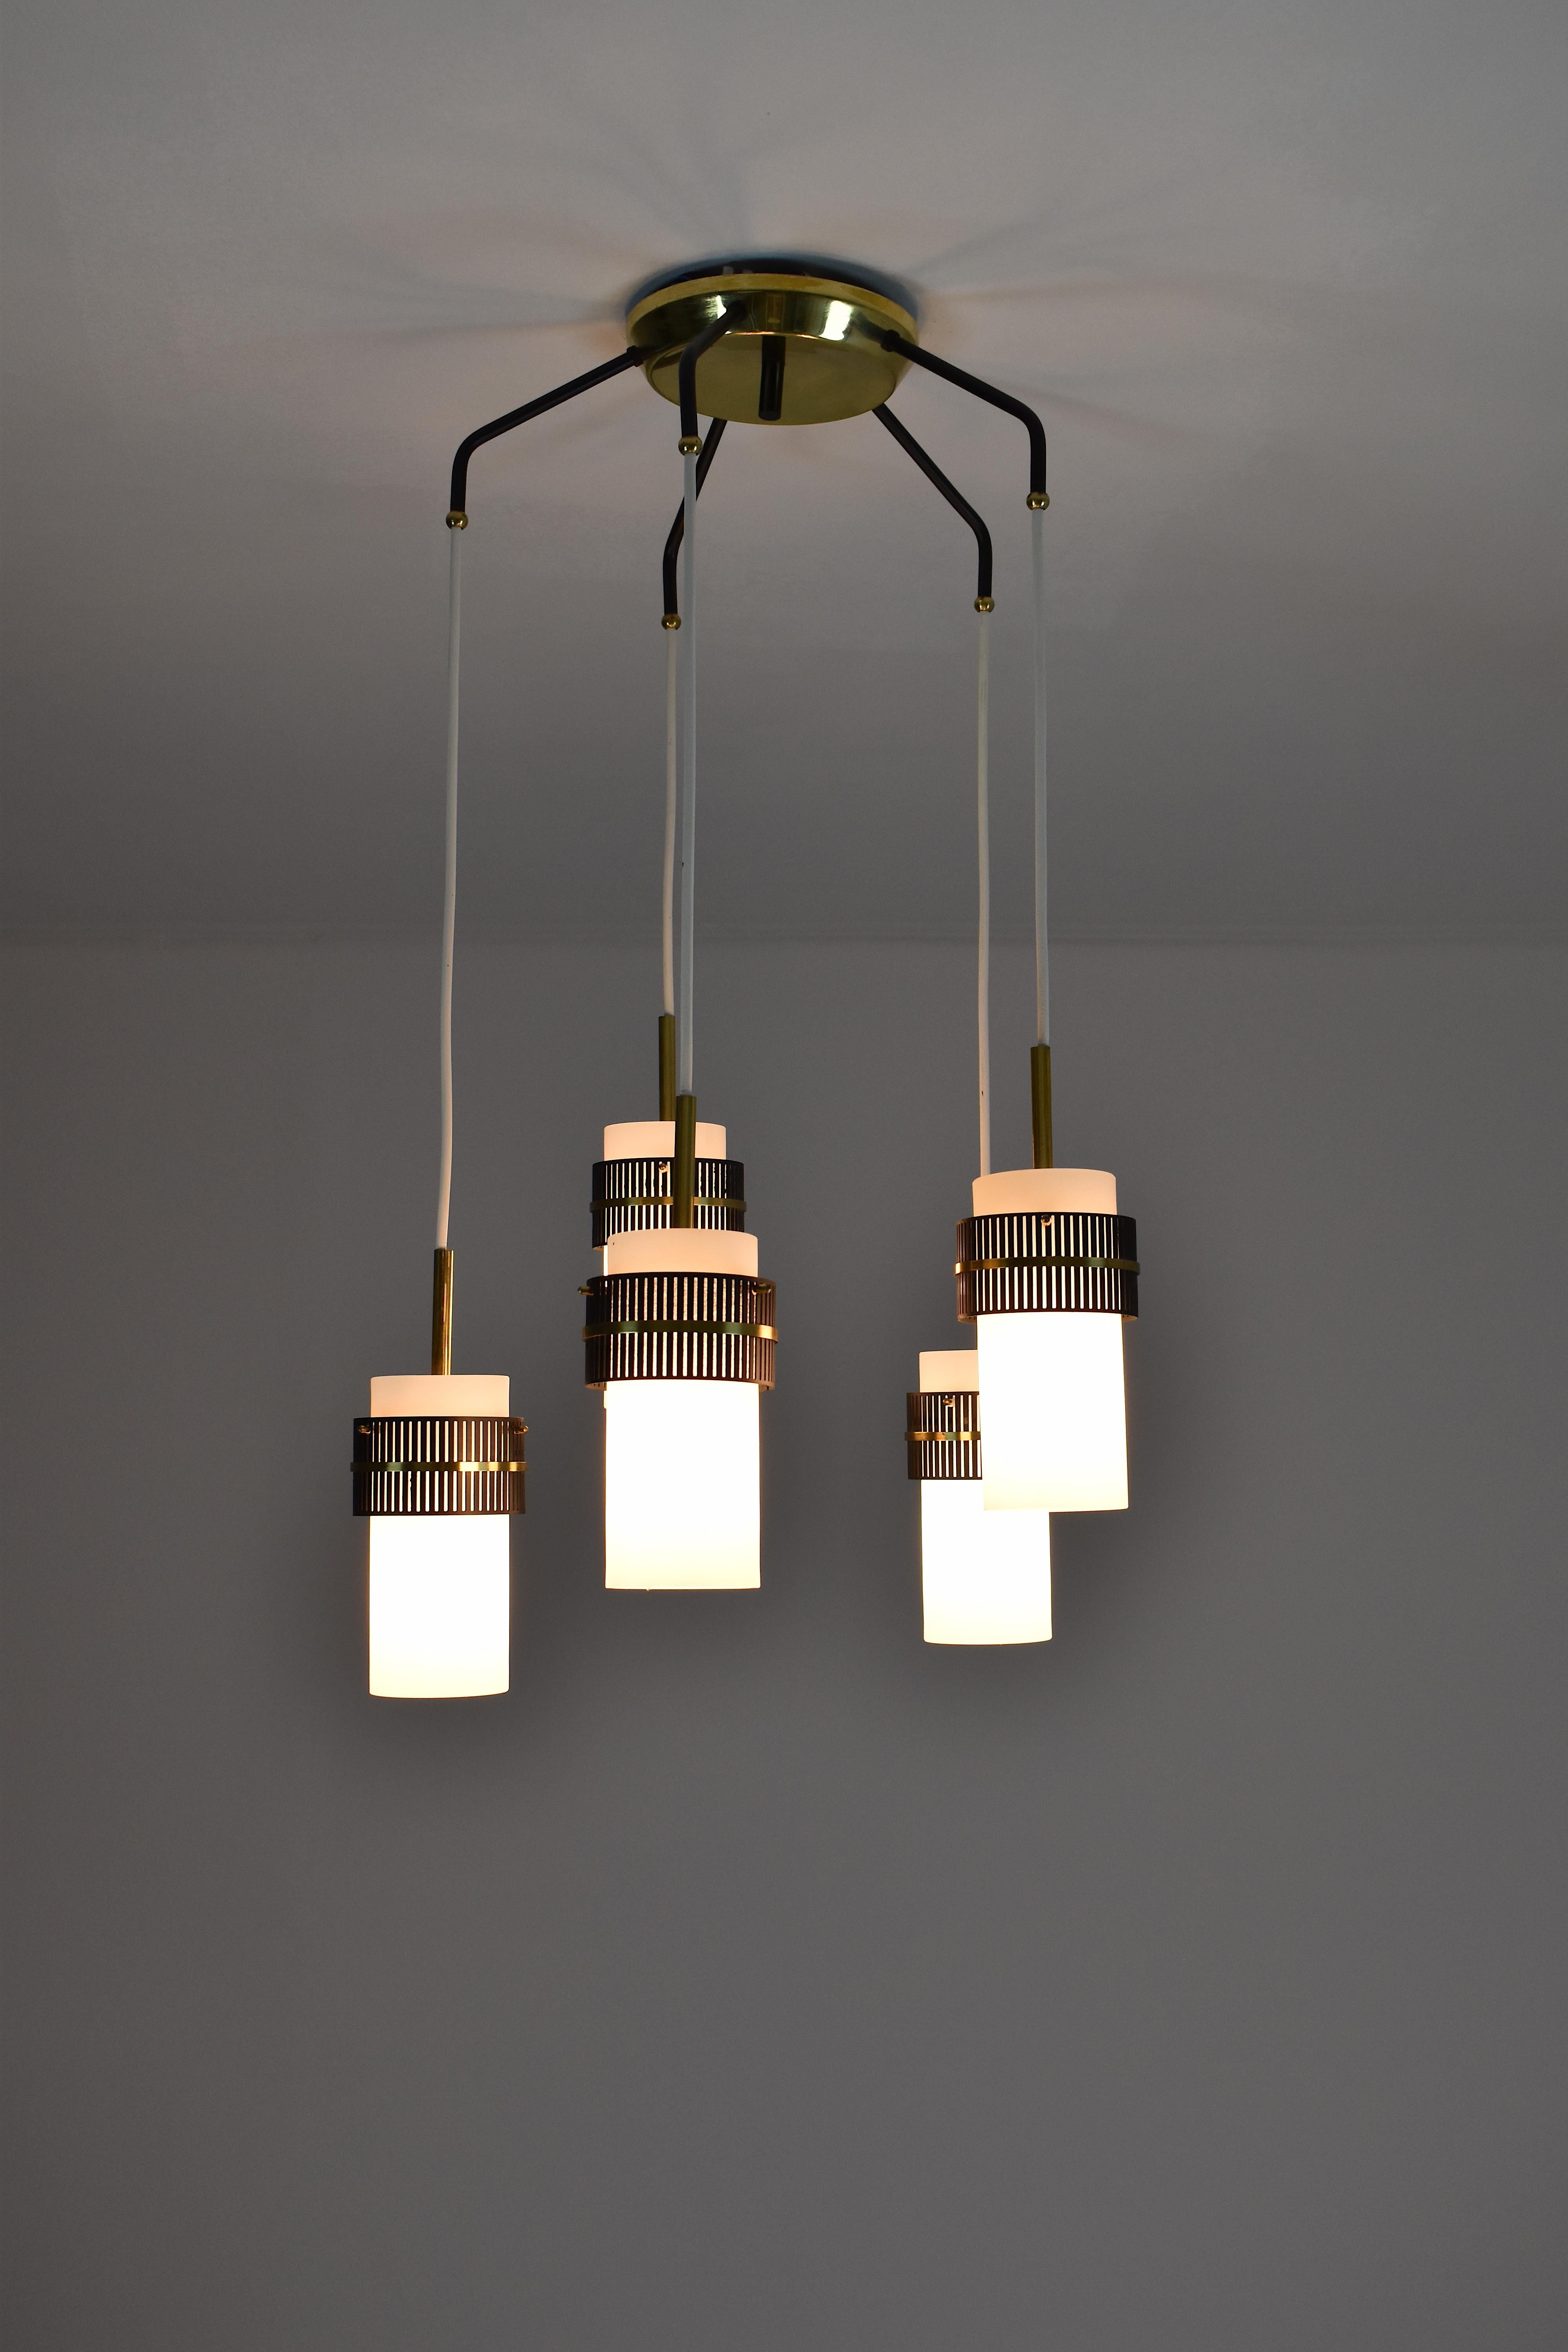 An elegant 20th-century vintage chandelier or pendant from the 1950s in the style of Stilnovo. This statement piece is composed of 4 lights designed with opaline glass shades complimented by stunning brass and metal black perforated details that